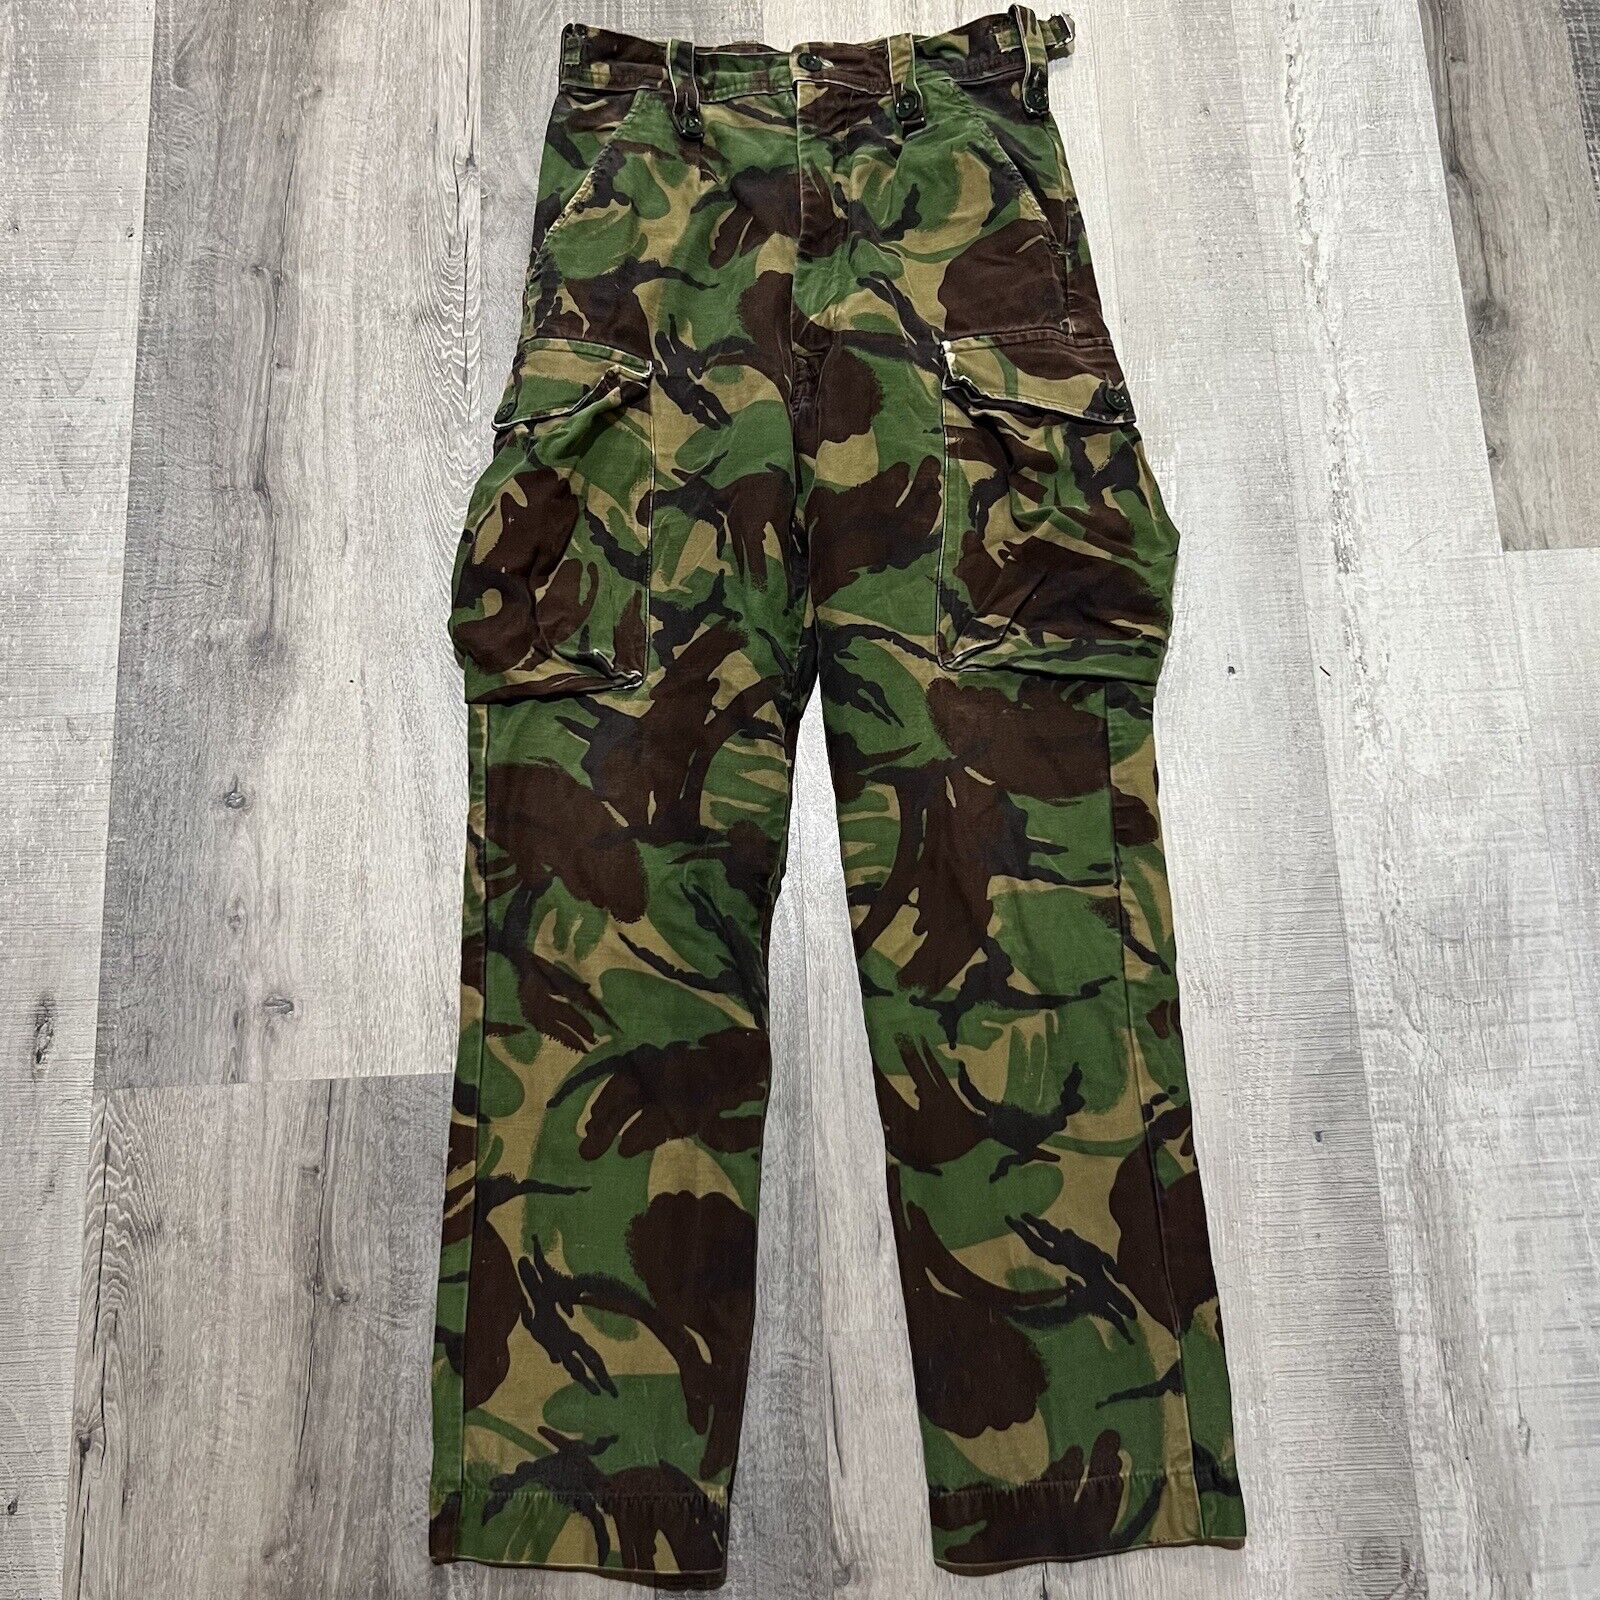 VTG British Army Harvey’s & Co DPM Camouflage Camo Military Trousers NATO Pants